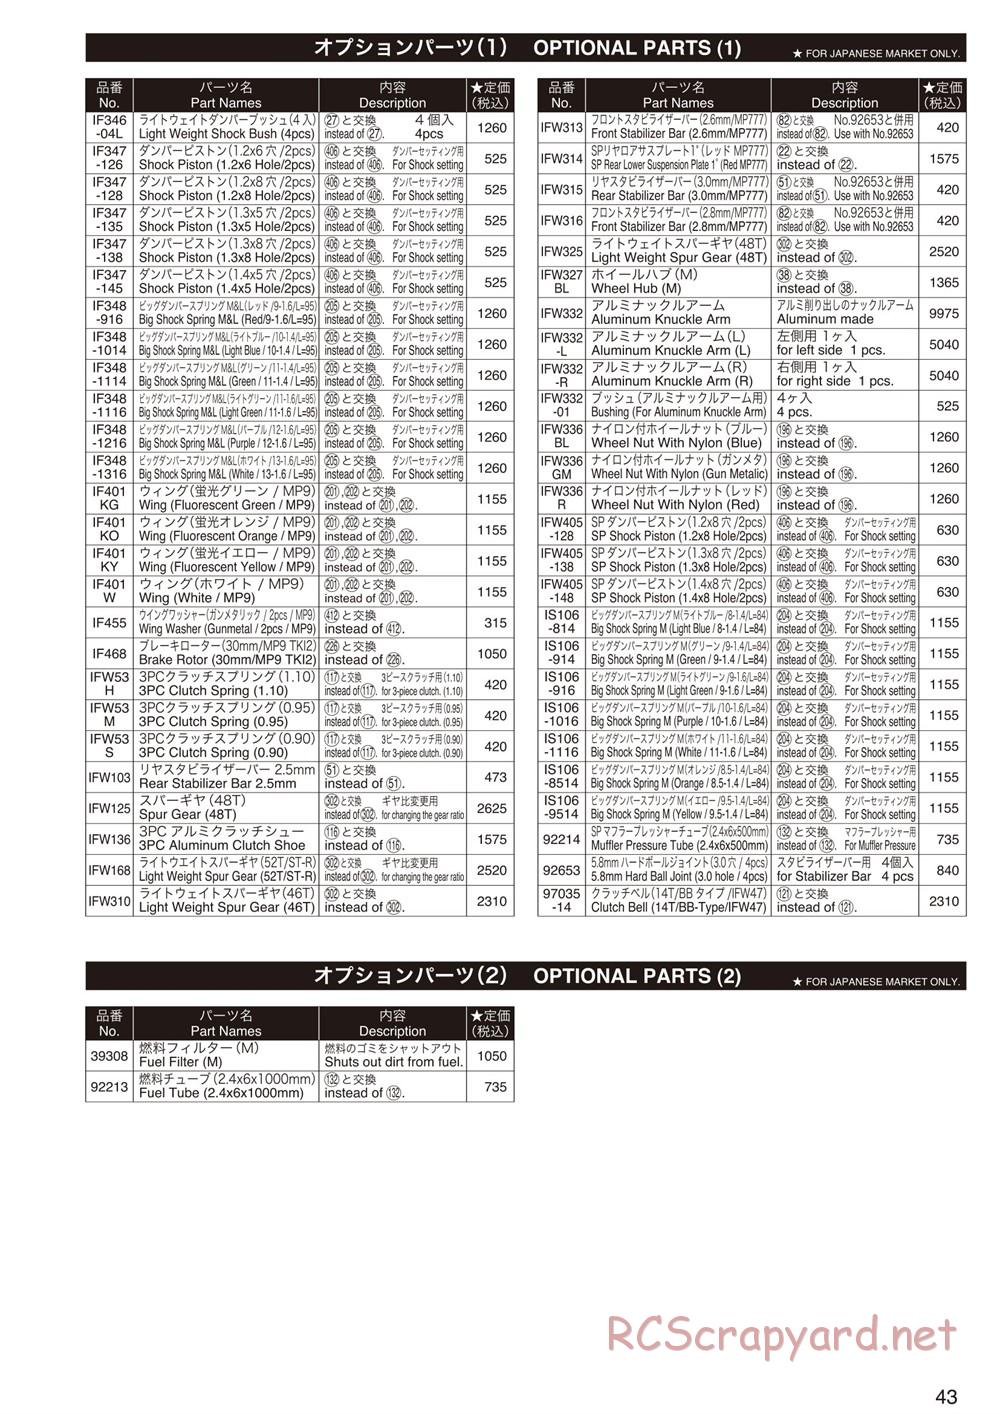 Kyosho - Inferno ST-RR Evo.2 - Parts List - Page 3